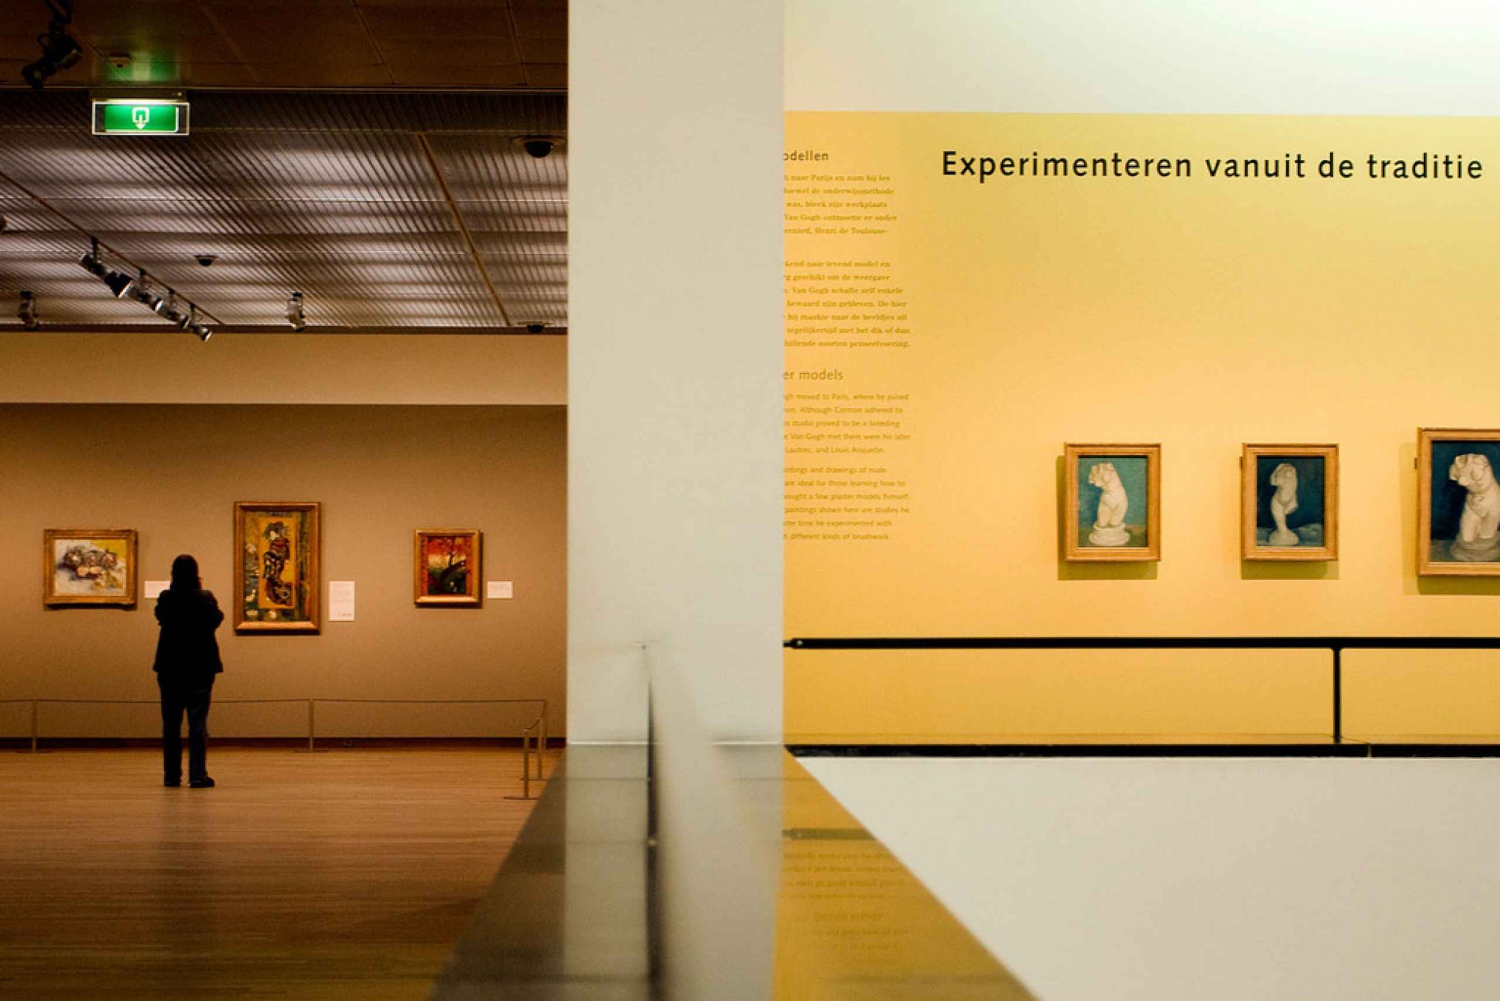 Amsterdam: Van Gogh Museum Guided Tour (Not Entry Ticket)